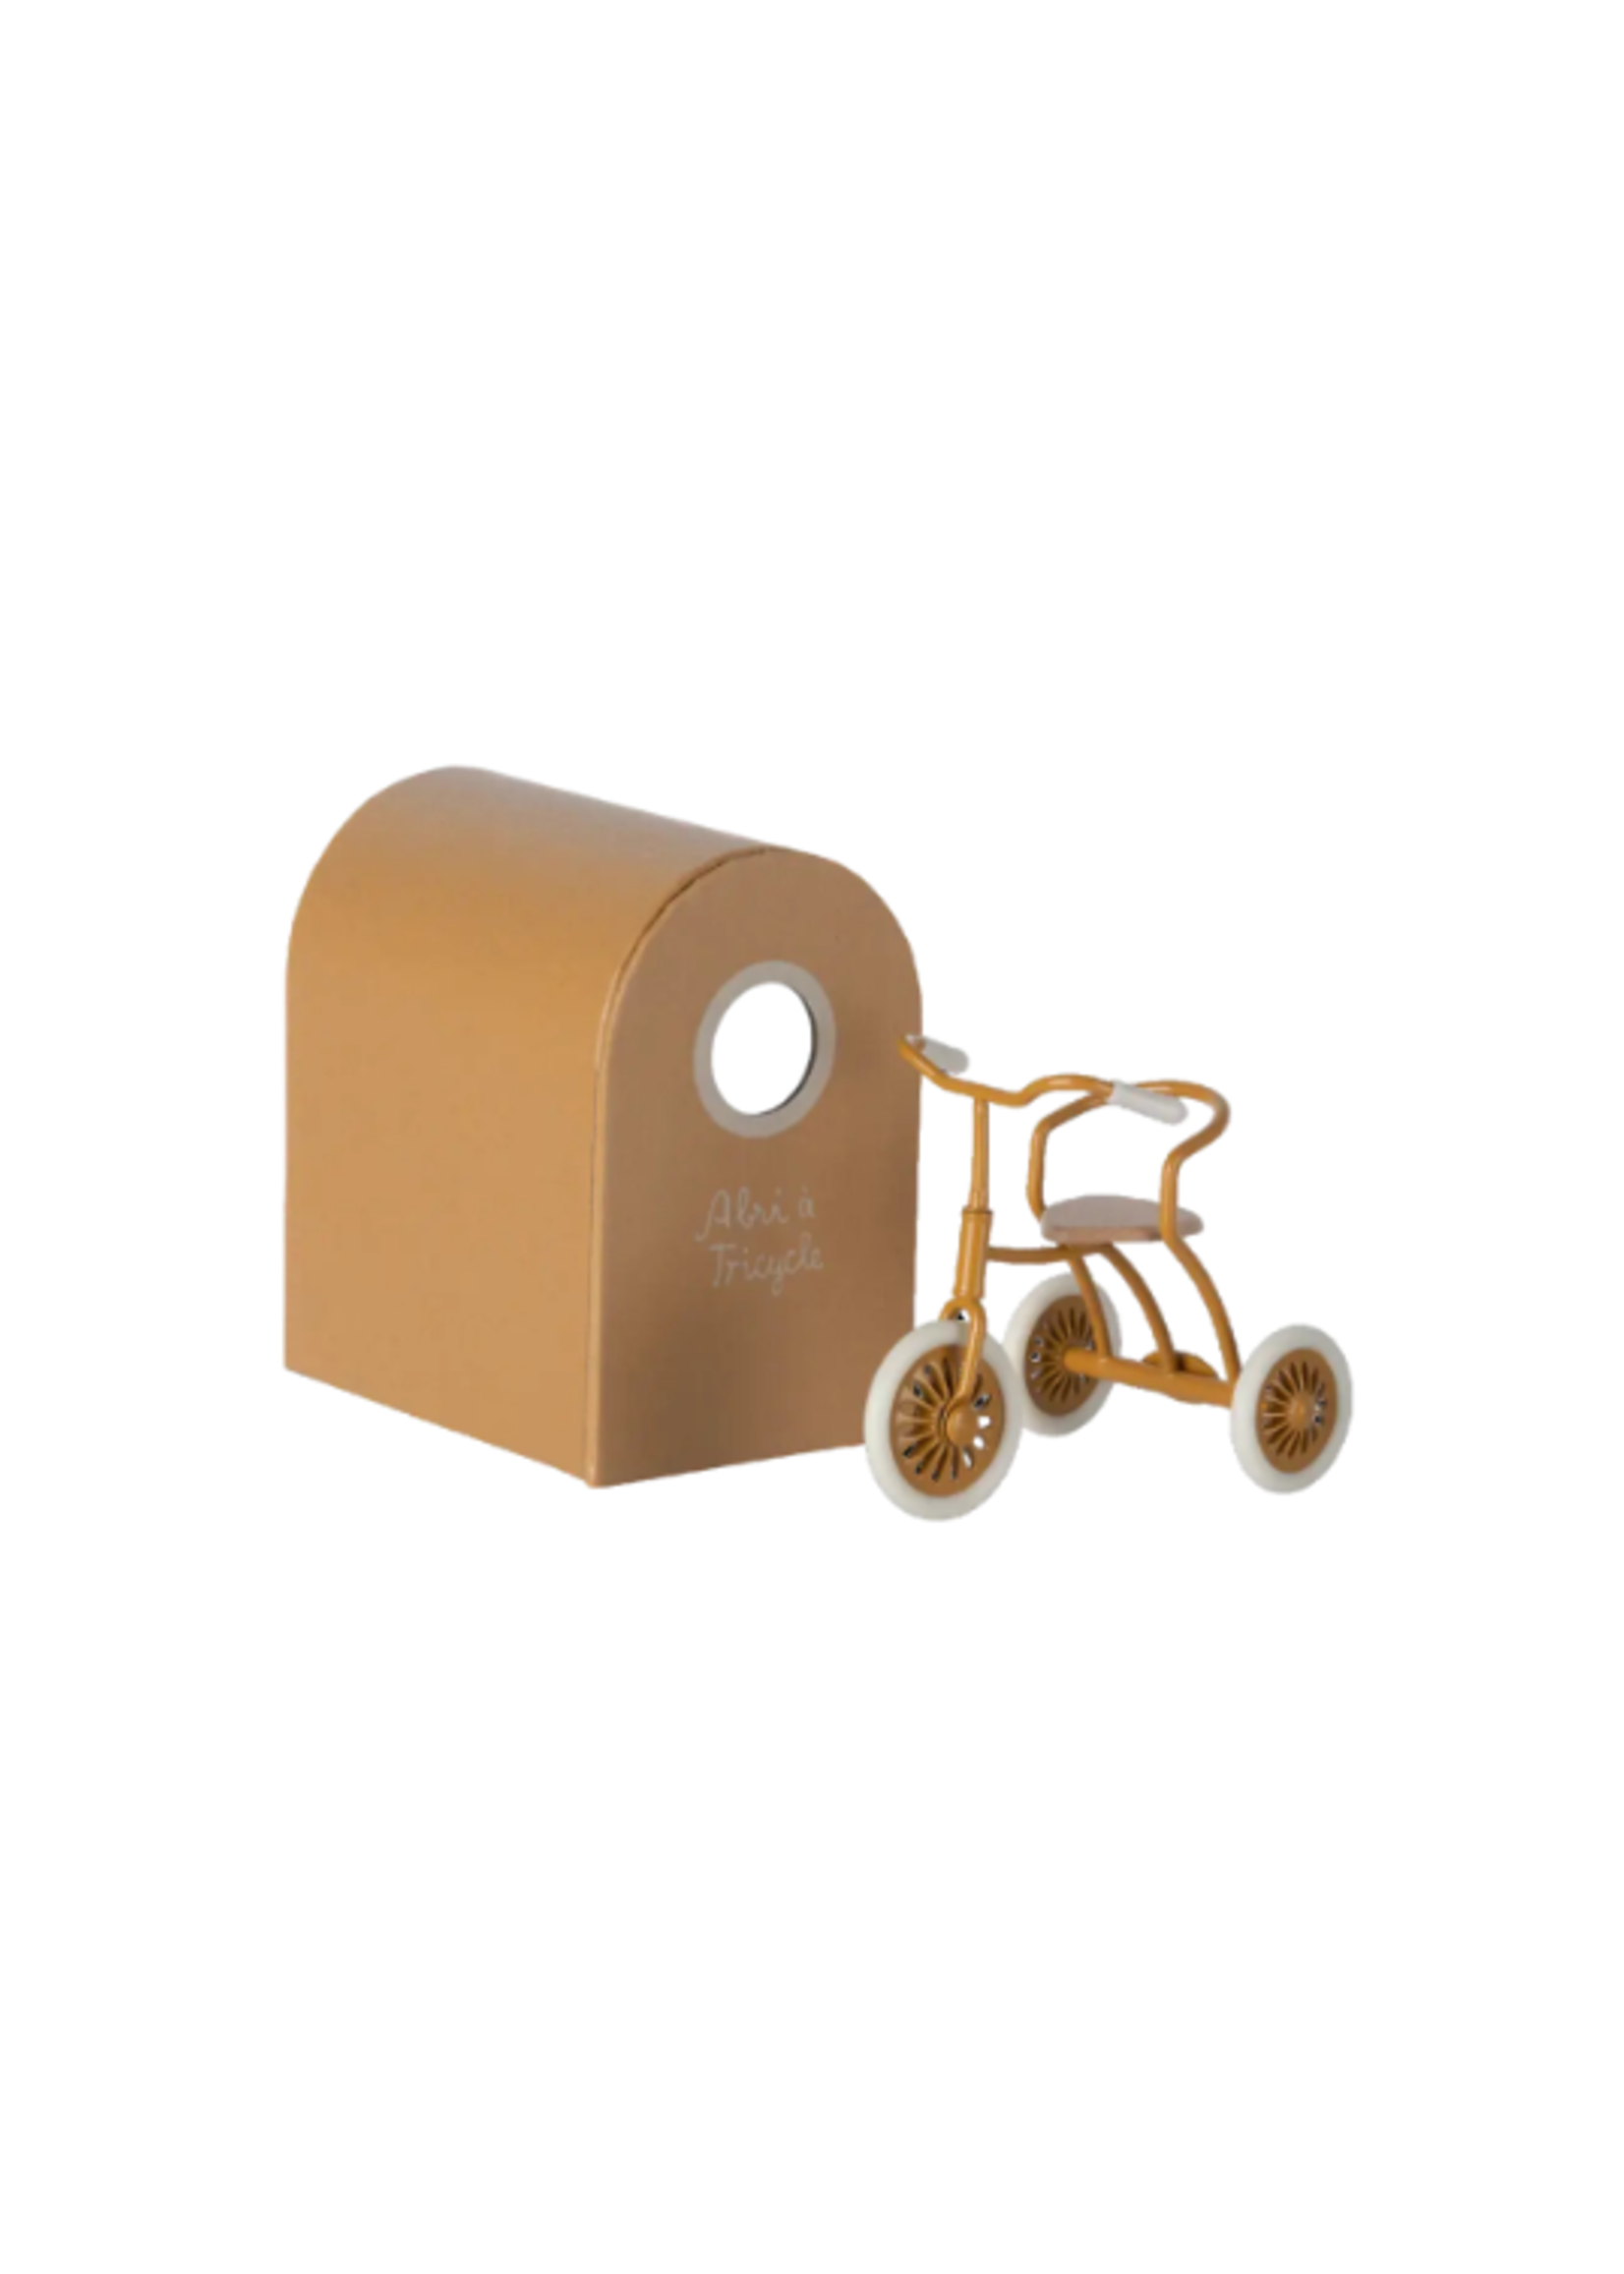 Trycicle with Shed, Maileg Mouse - Ocher